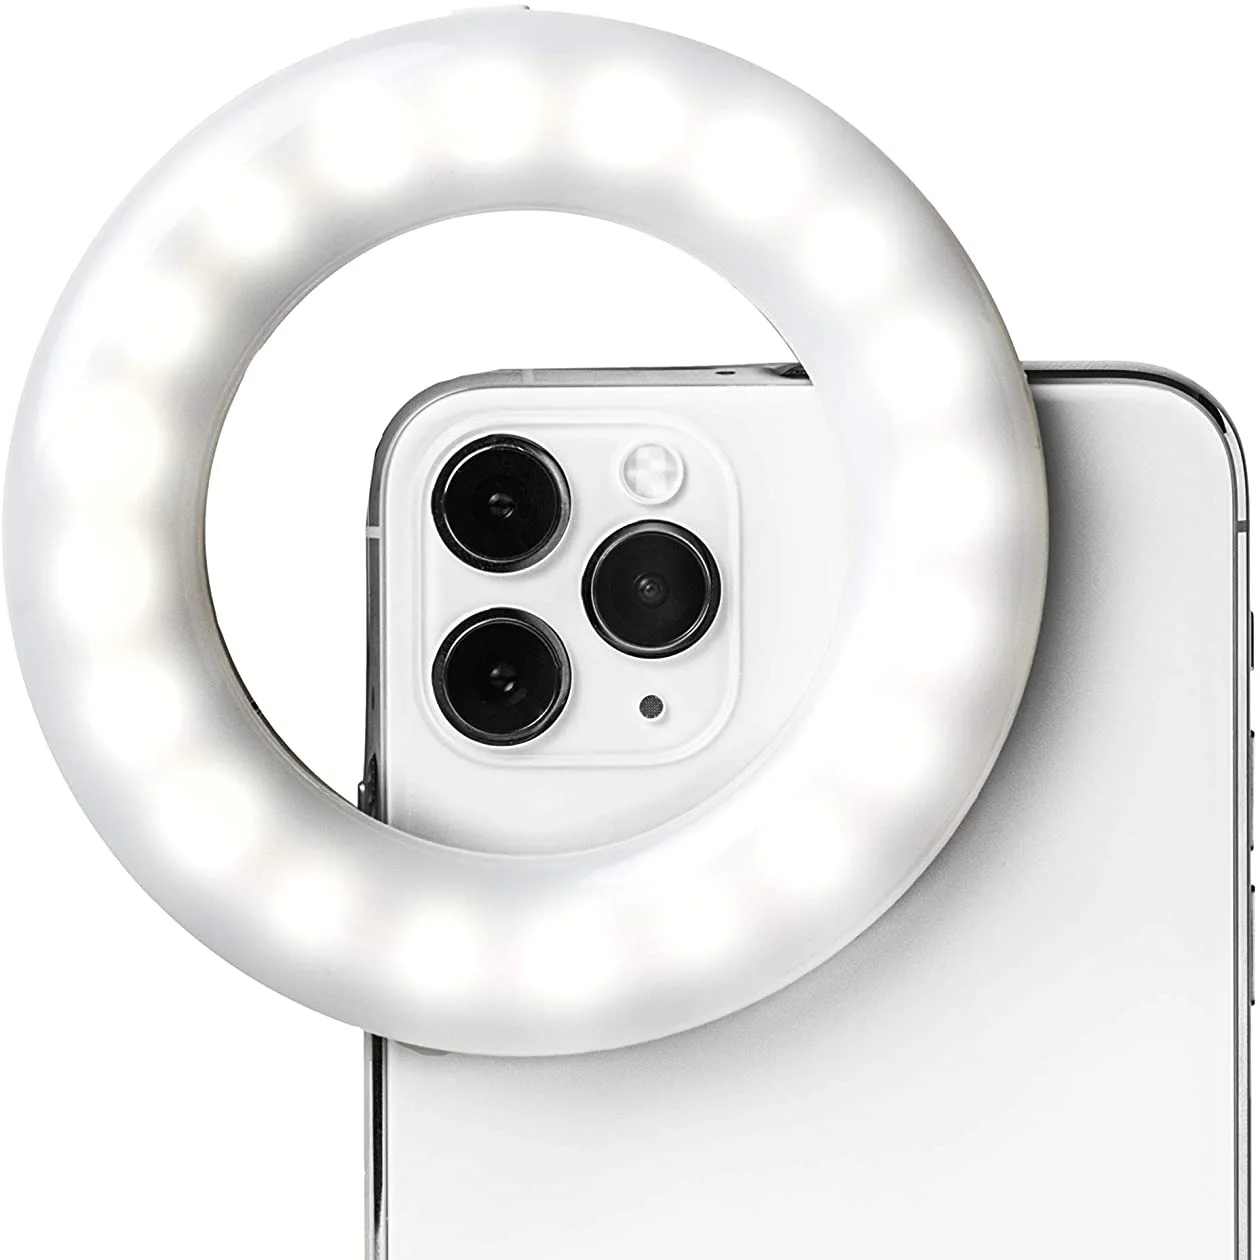 Selfie One - Rechargeable Ring Light Clip-on for iPhone, Android, Tablet, and Laptop Camera Photography and Videography Beauty